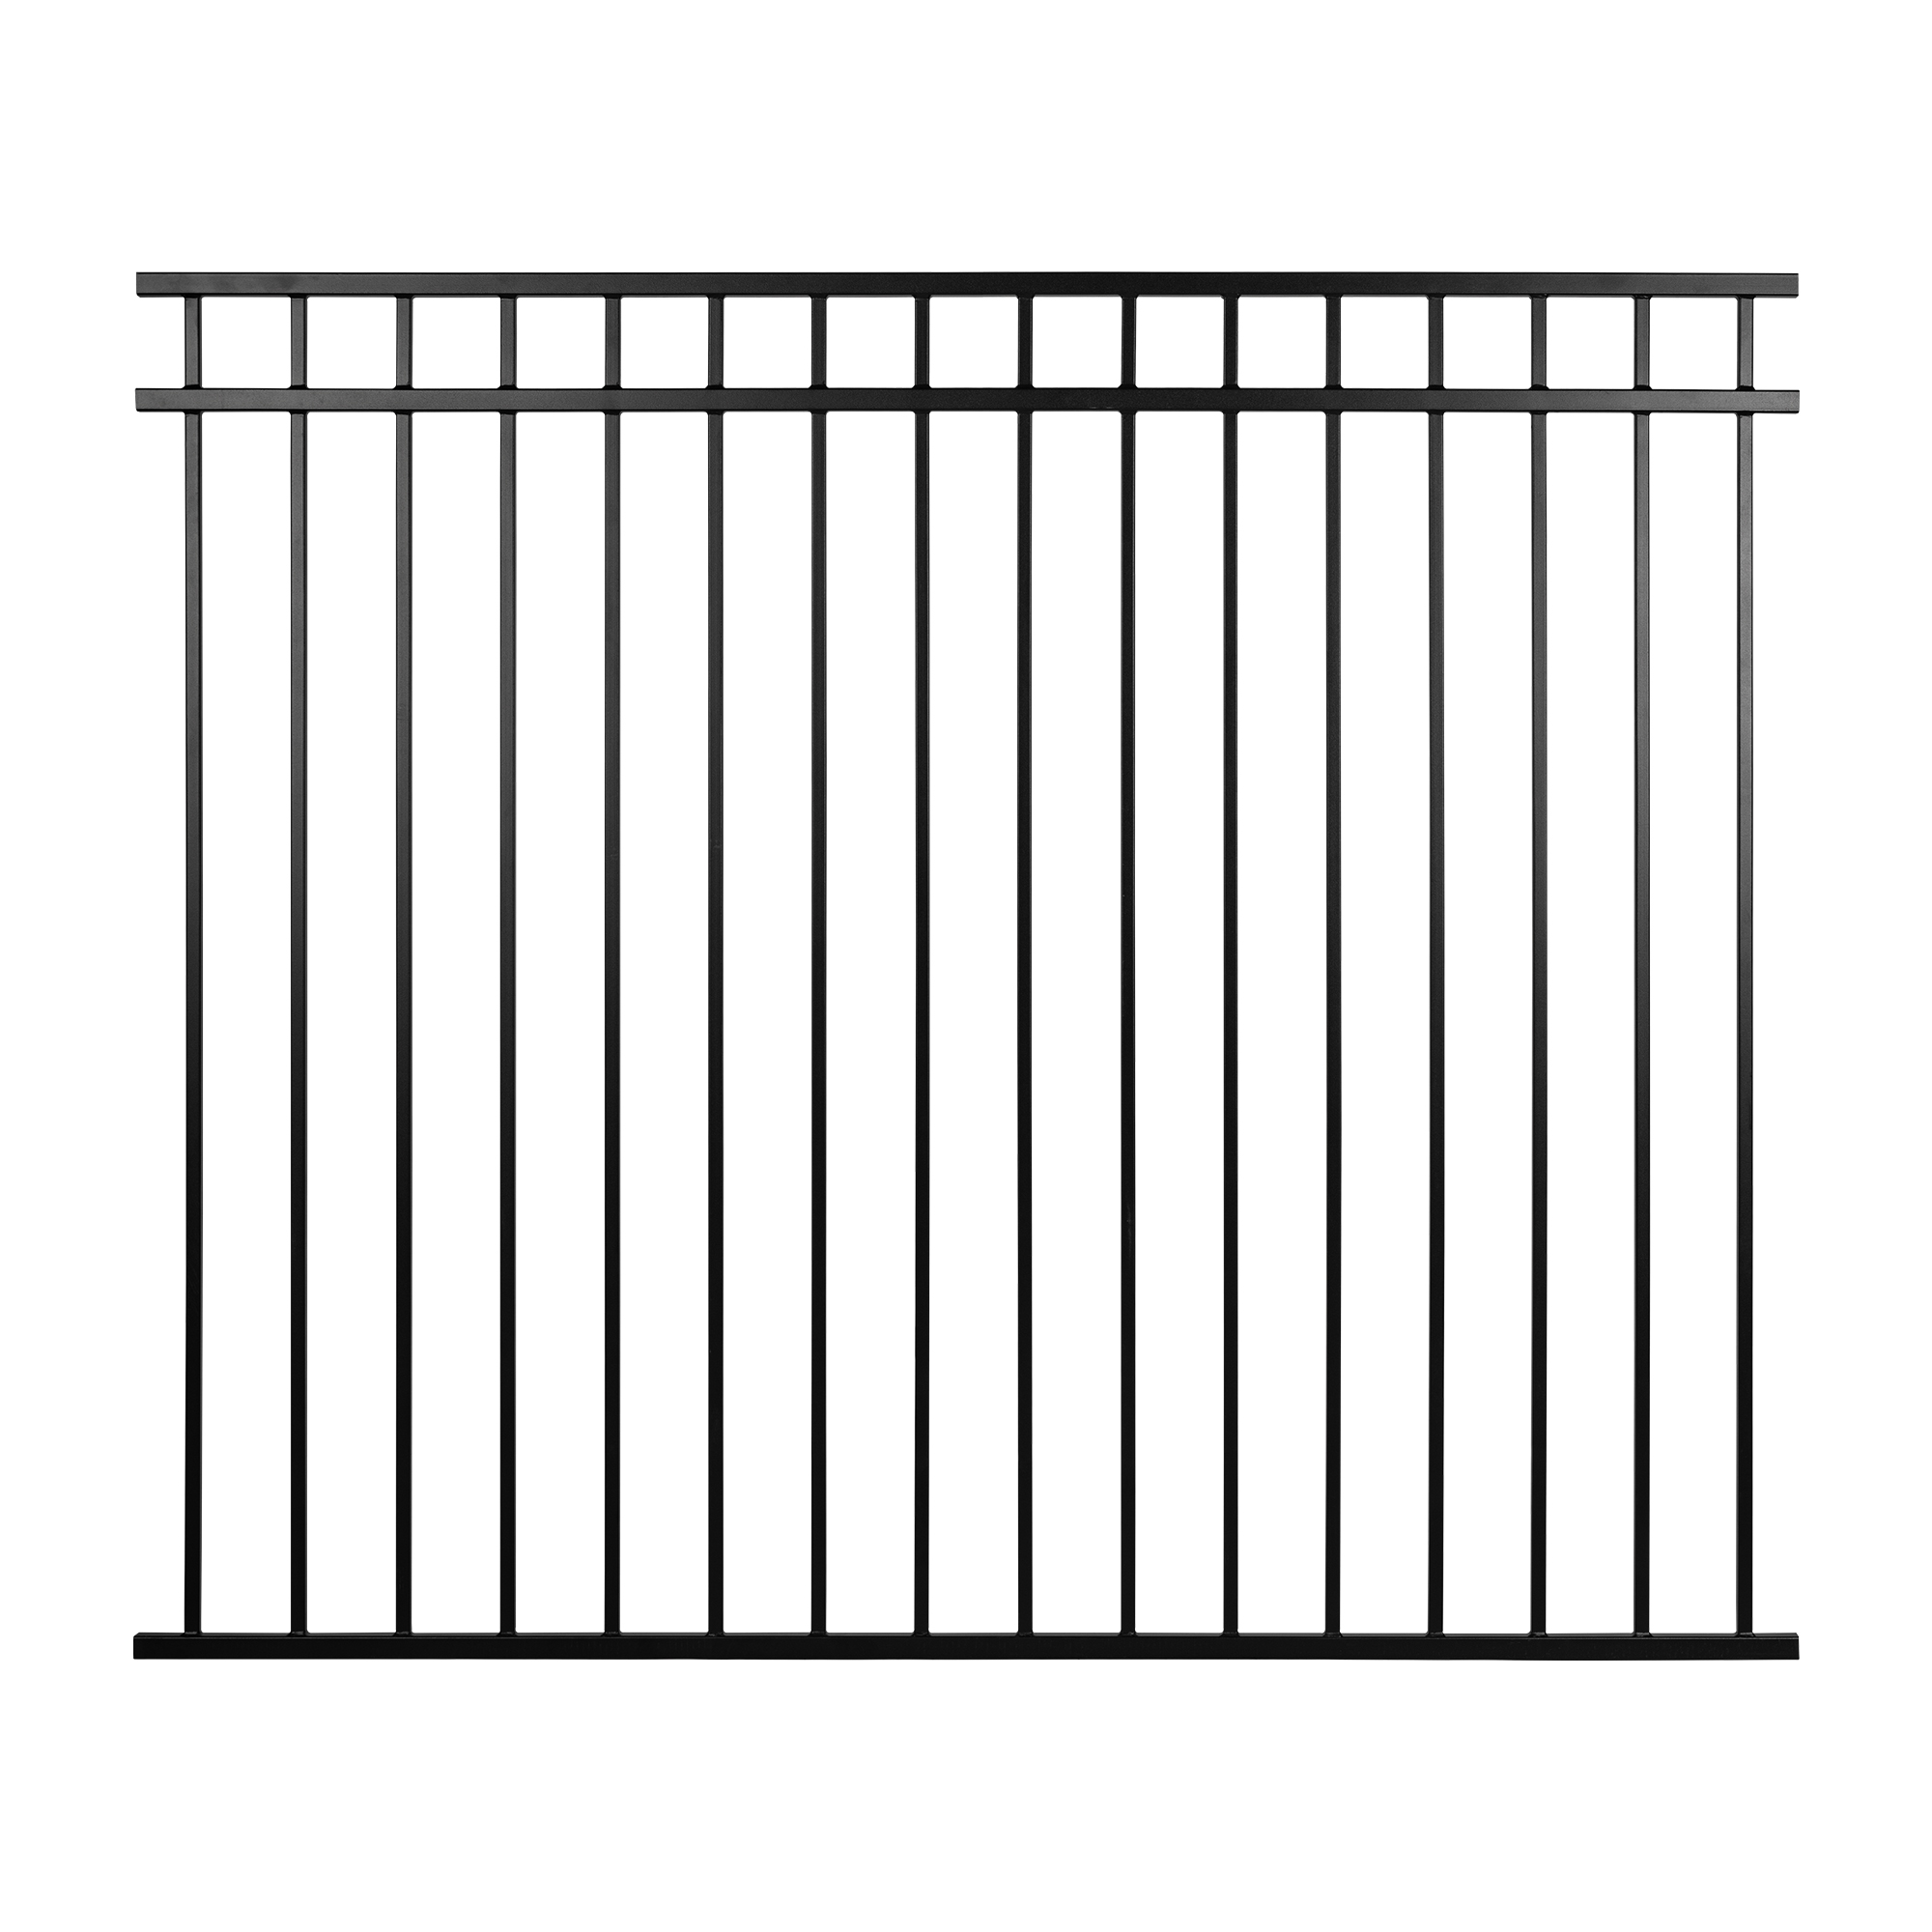 CPRTB7260 legacy fence coral iron fence panel product photo.